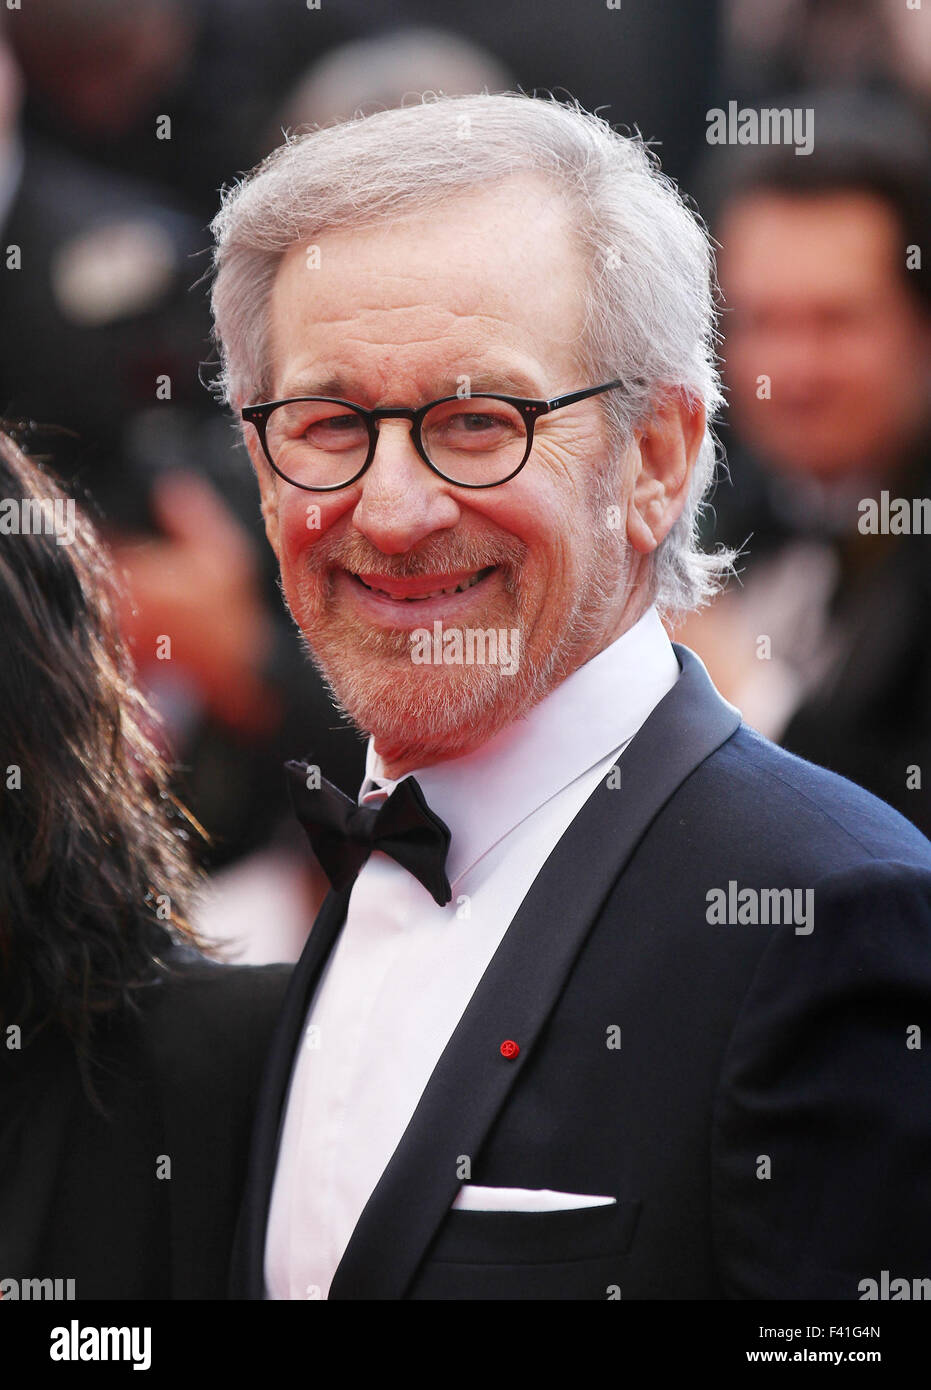 Steven Spielberg seen at the Cannes film festival in France, 2013 Stock Photo